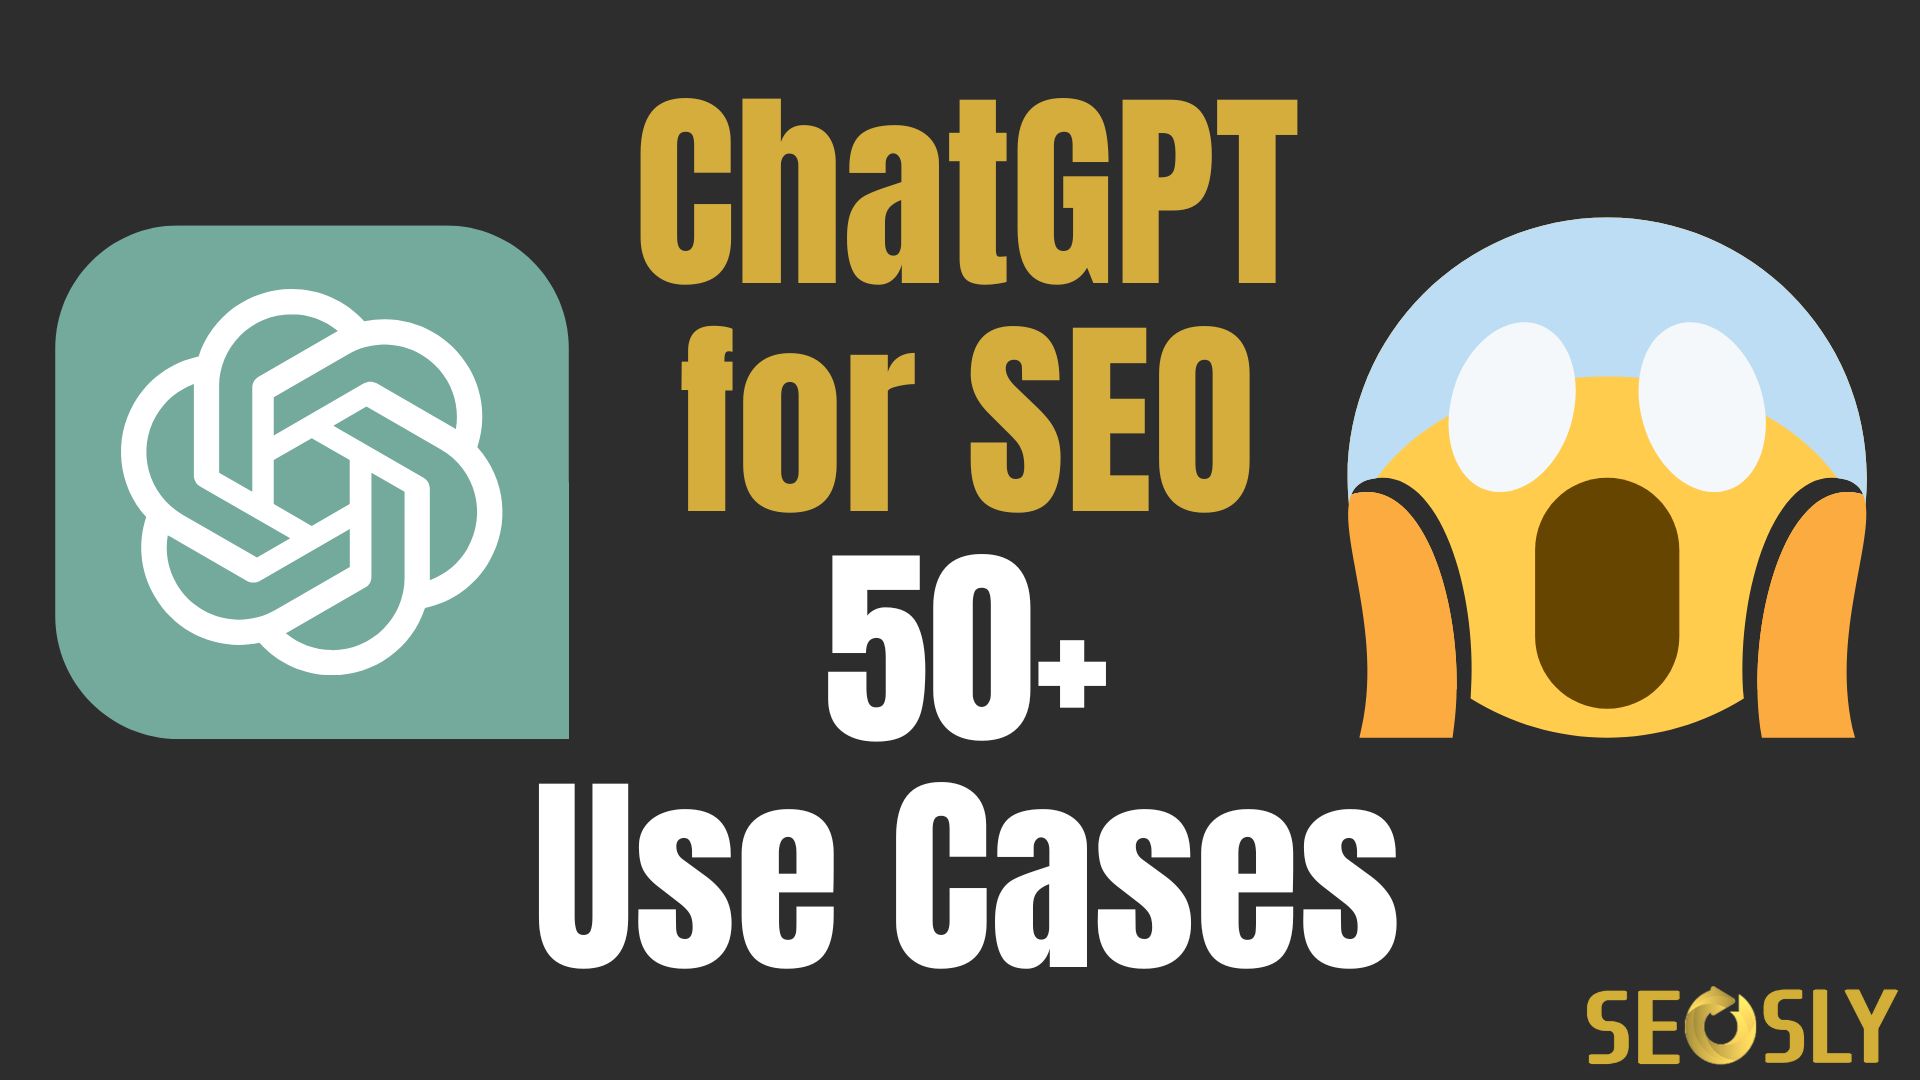 ChatGPT For SEO: 50+ Uses, Example Prompts, And Tips | SEOSLY